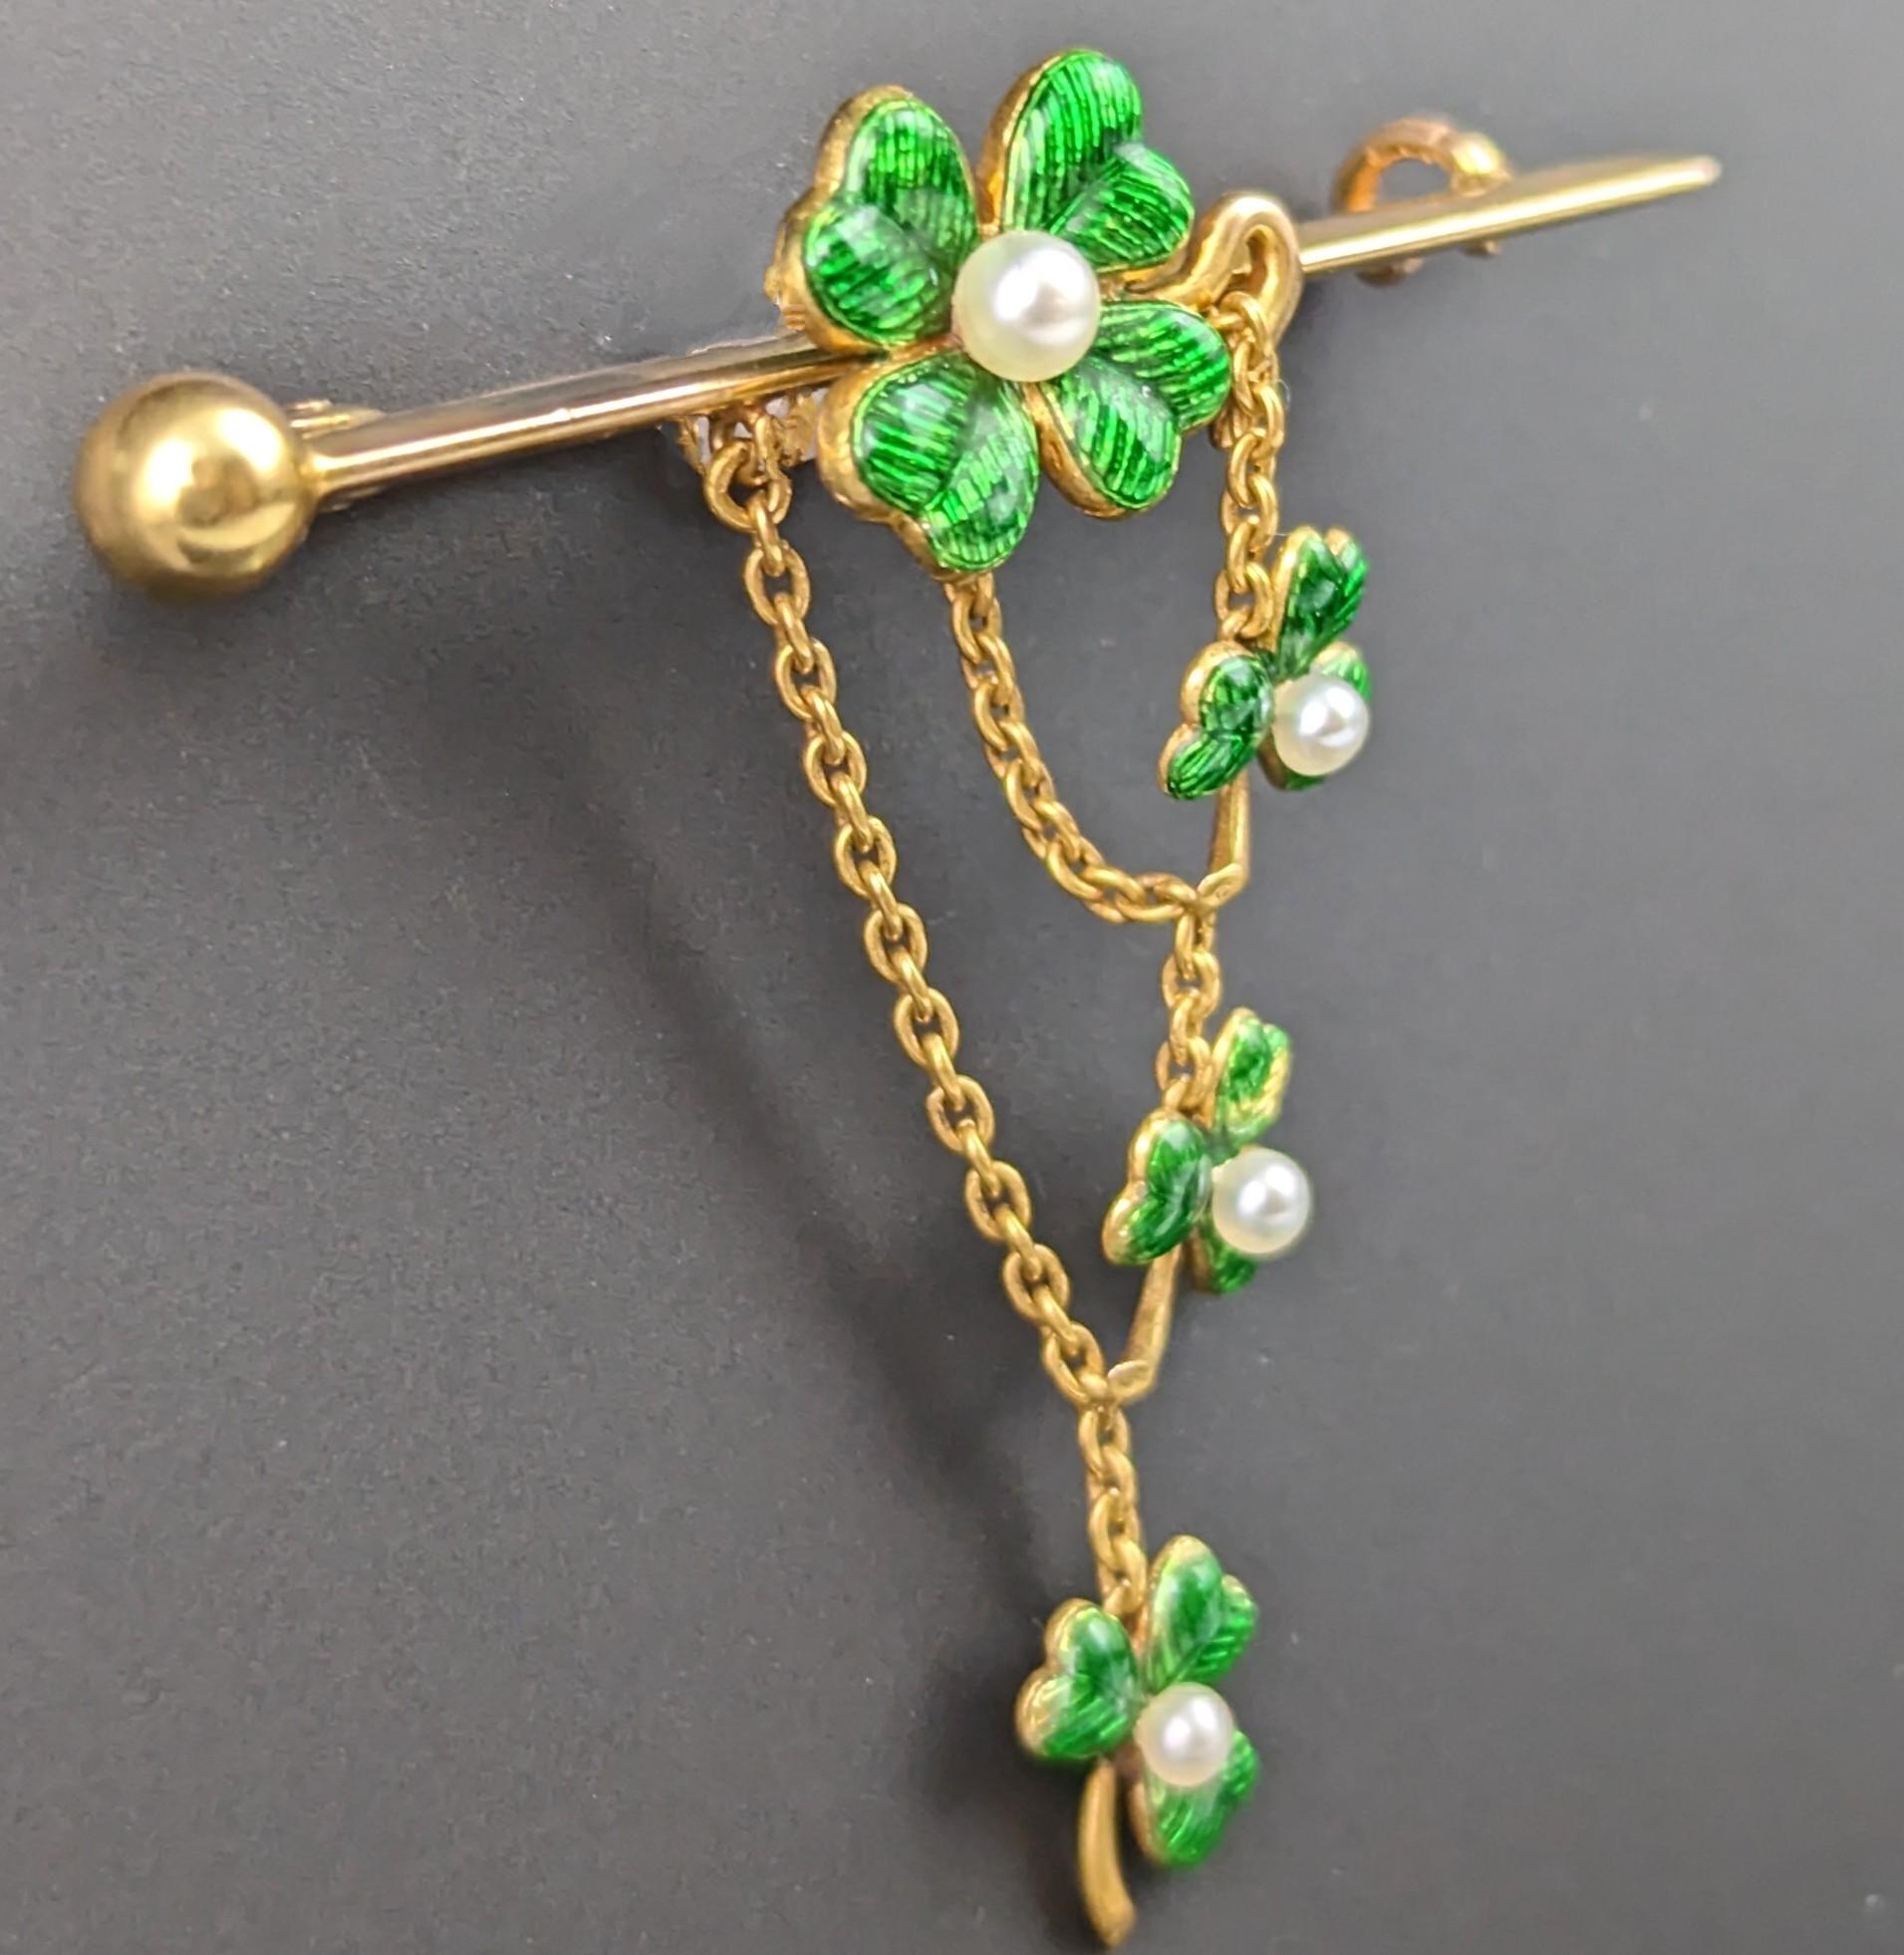 Antique Shamrock brooch, 15k gold, Guilloche enamel and seed pearl 1